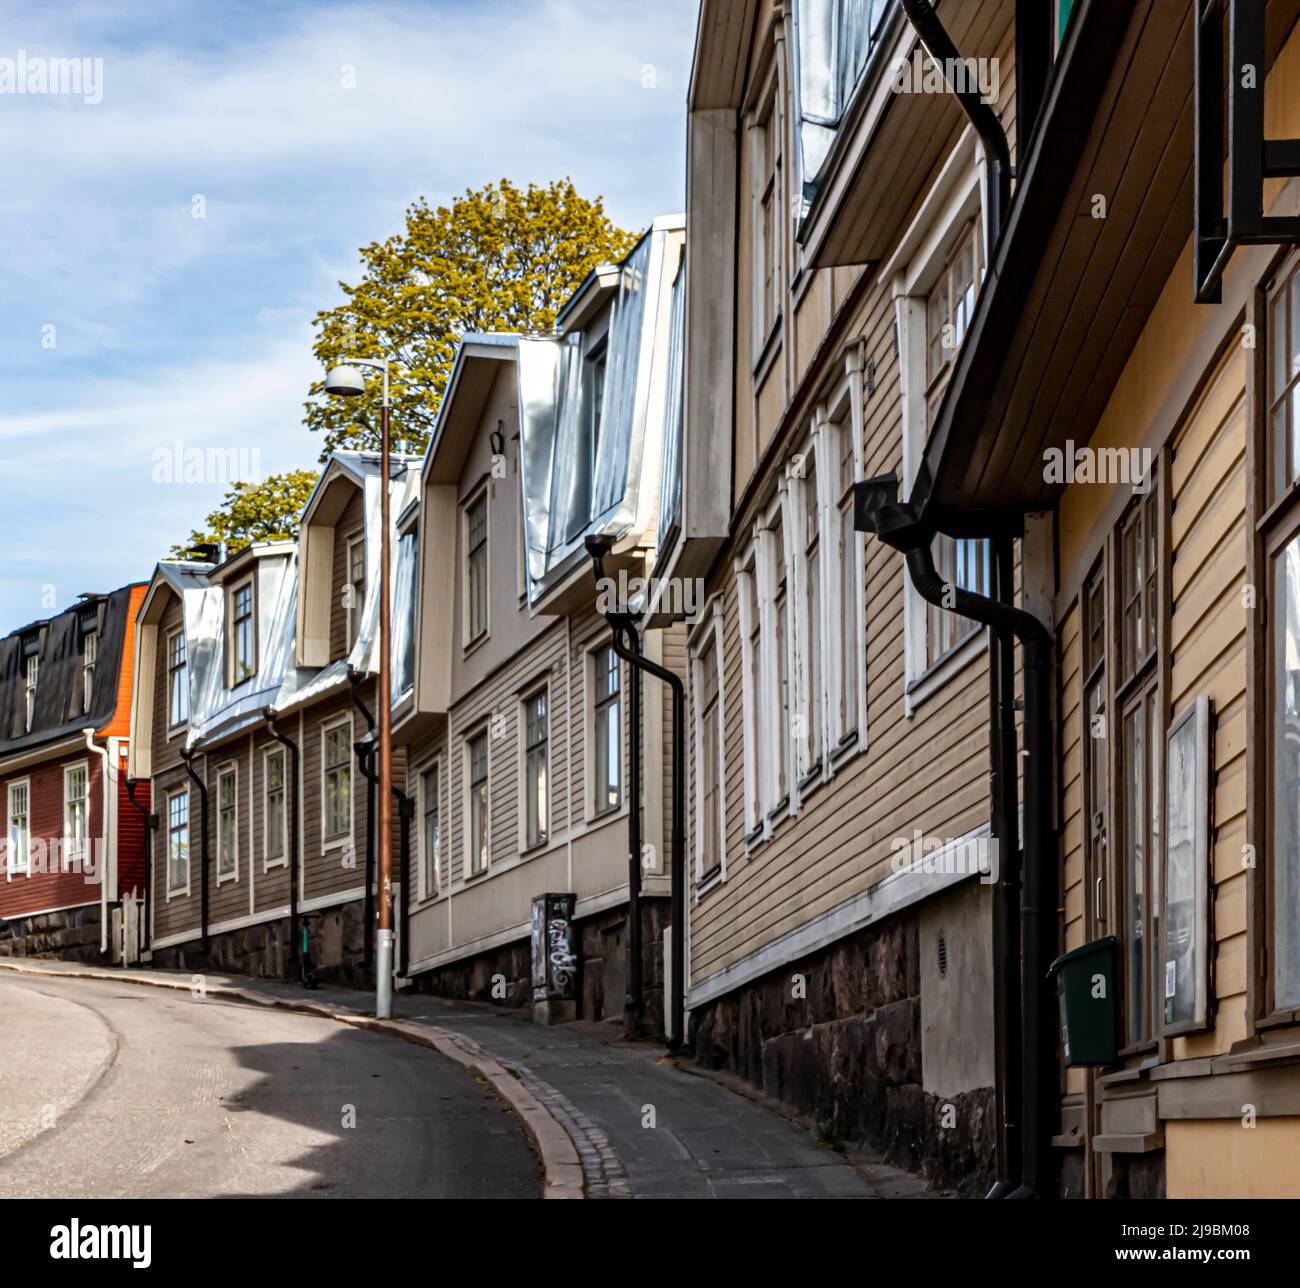 View of Vallilantie in the Vallila wooden house district. Stock Photo